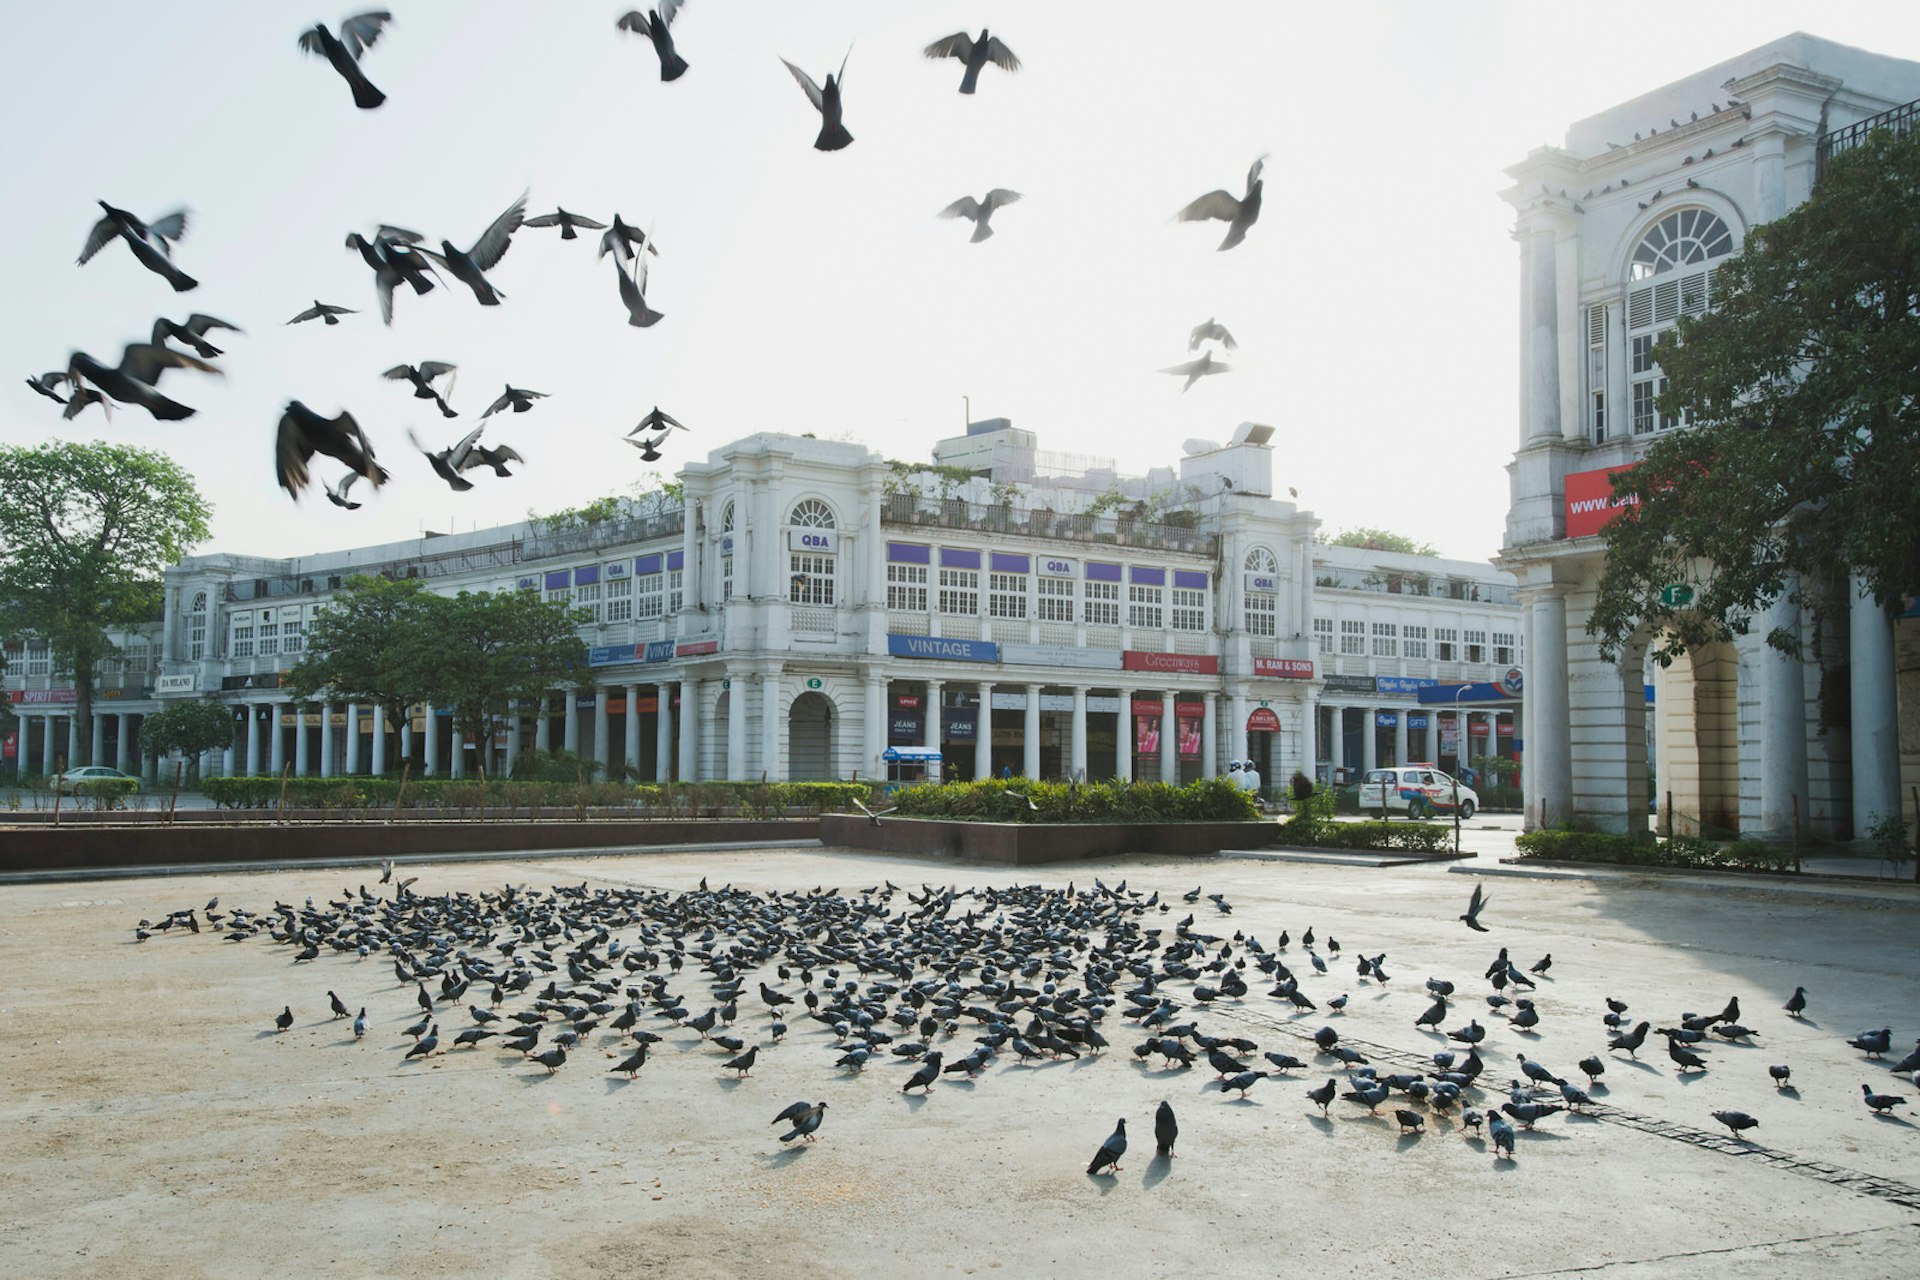 A flock of pigeons on a section of pavement in Delhi's Connaught Place. Some of the pigeons are flying while others remain on the ground. In the background, the white colonial storefronts of Connaught Place are visible. 